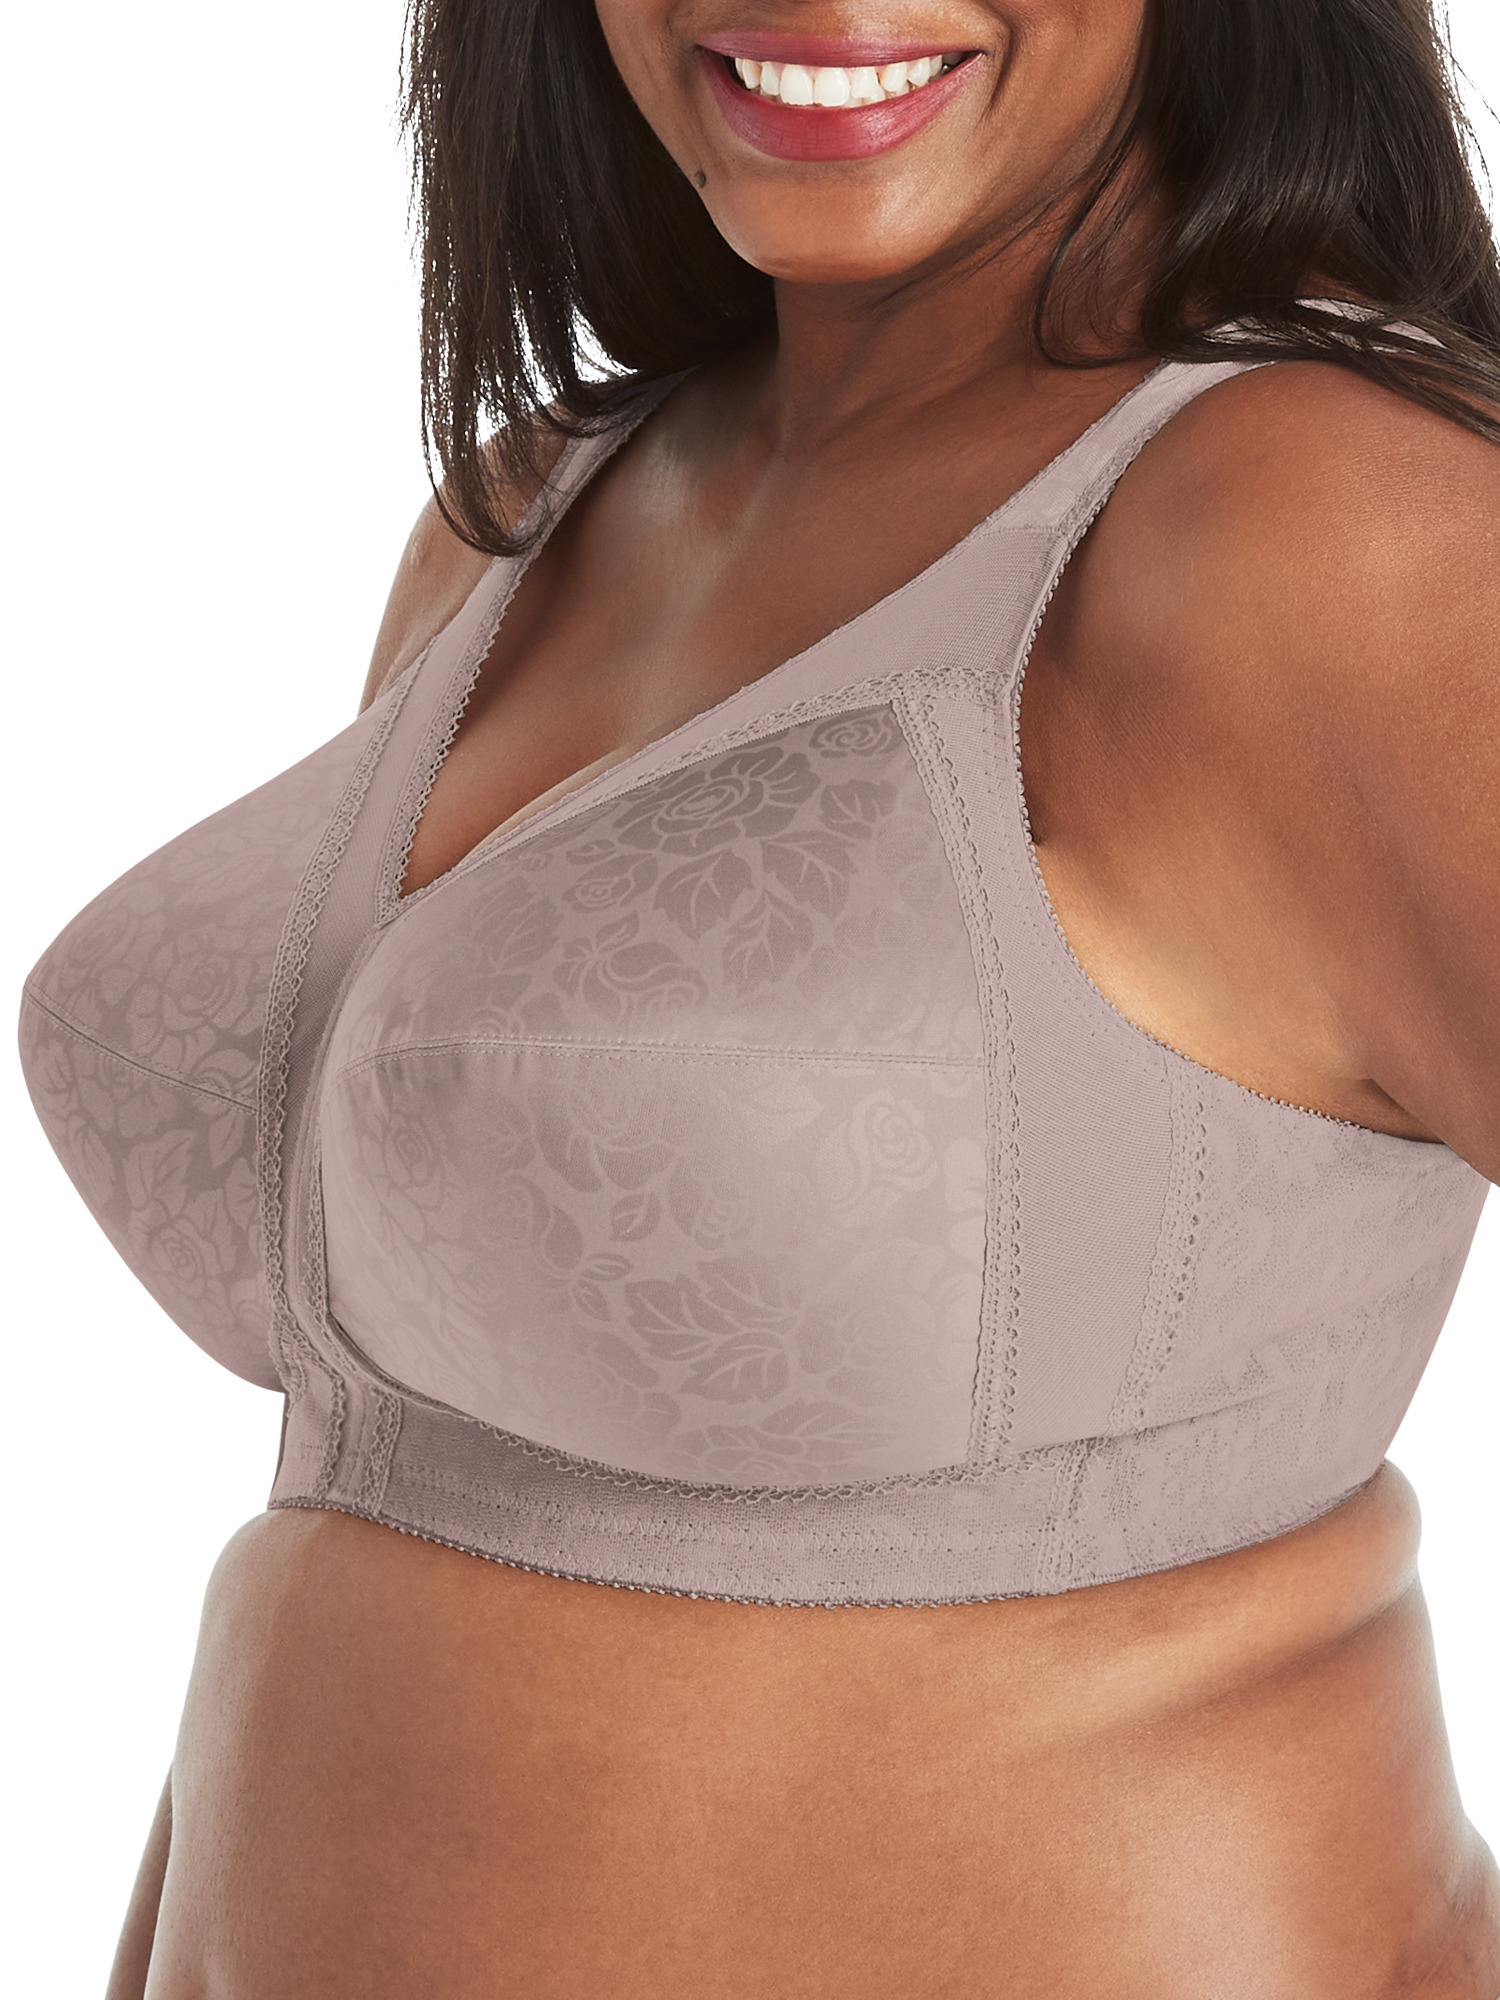 Playtex 4803 TruSupport 18-Hour Wire-Free Seamless Bra - 42D, Dot